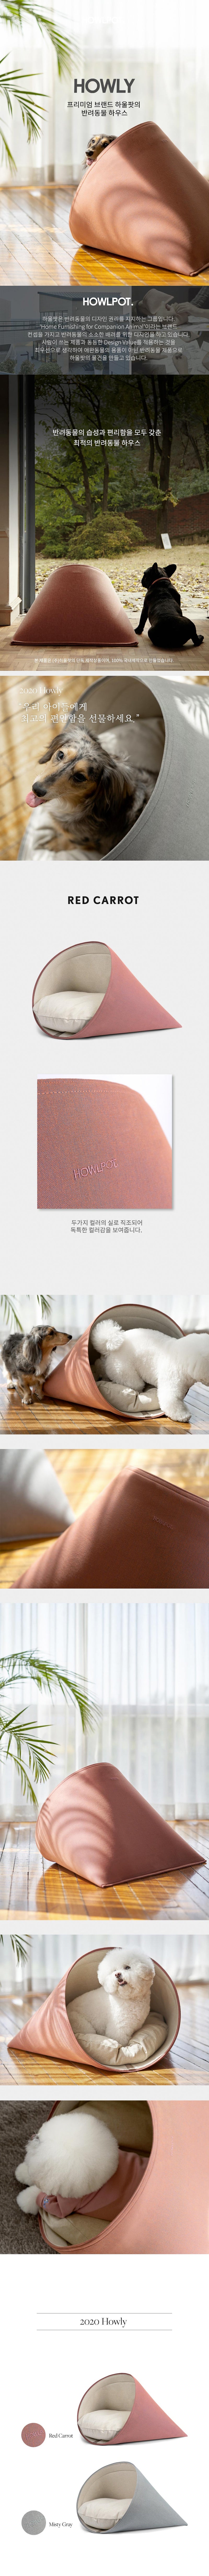 Howly Dog Bed in Red Carrot